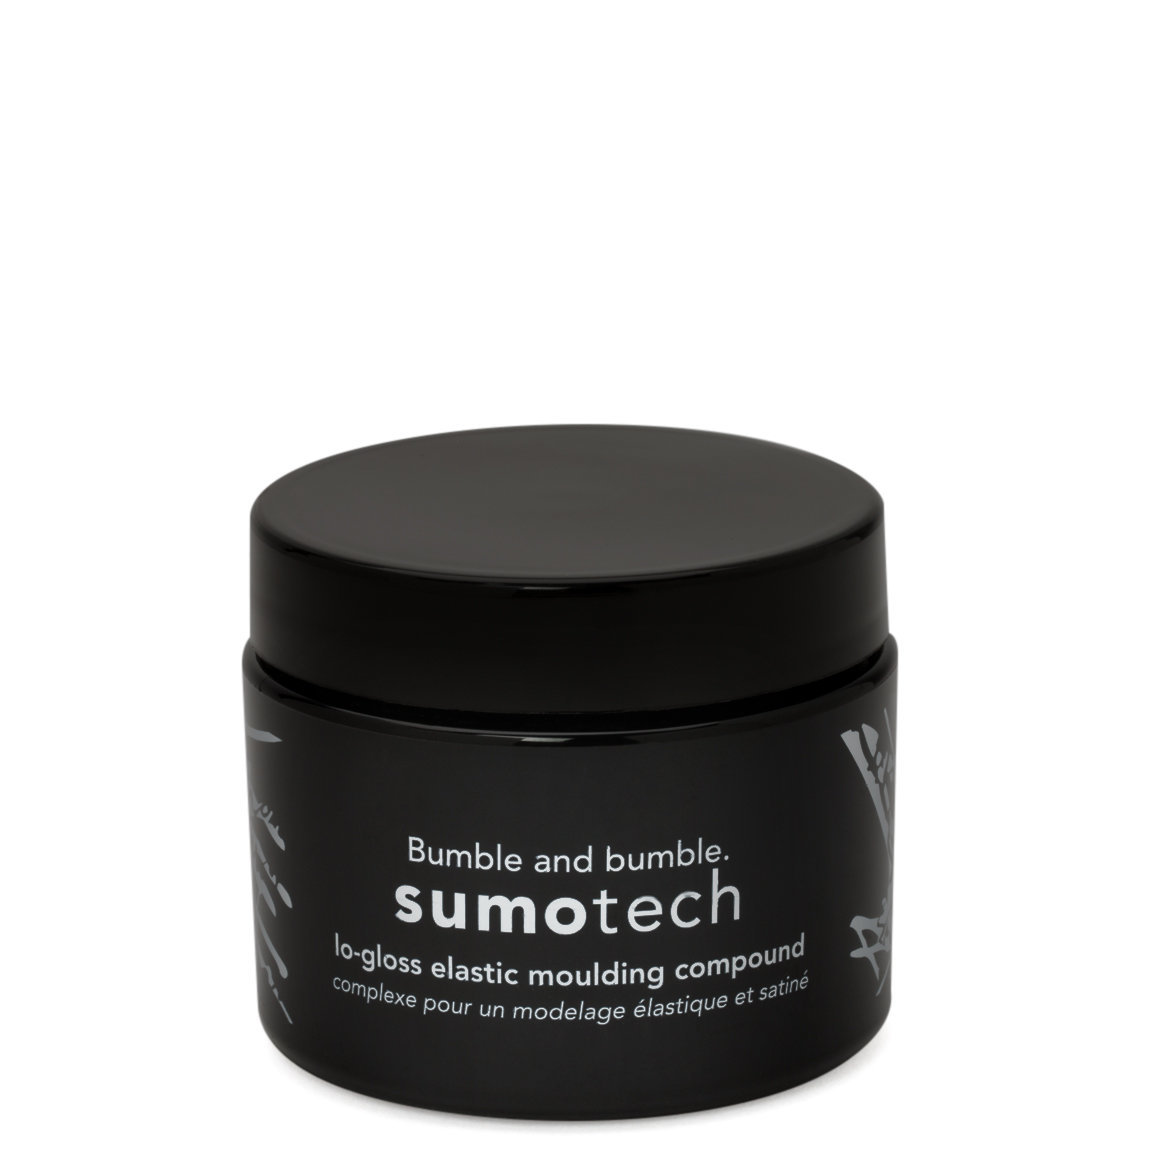 Bumble and bumble. Sumotech alternative view 1 - product swatch.